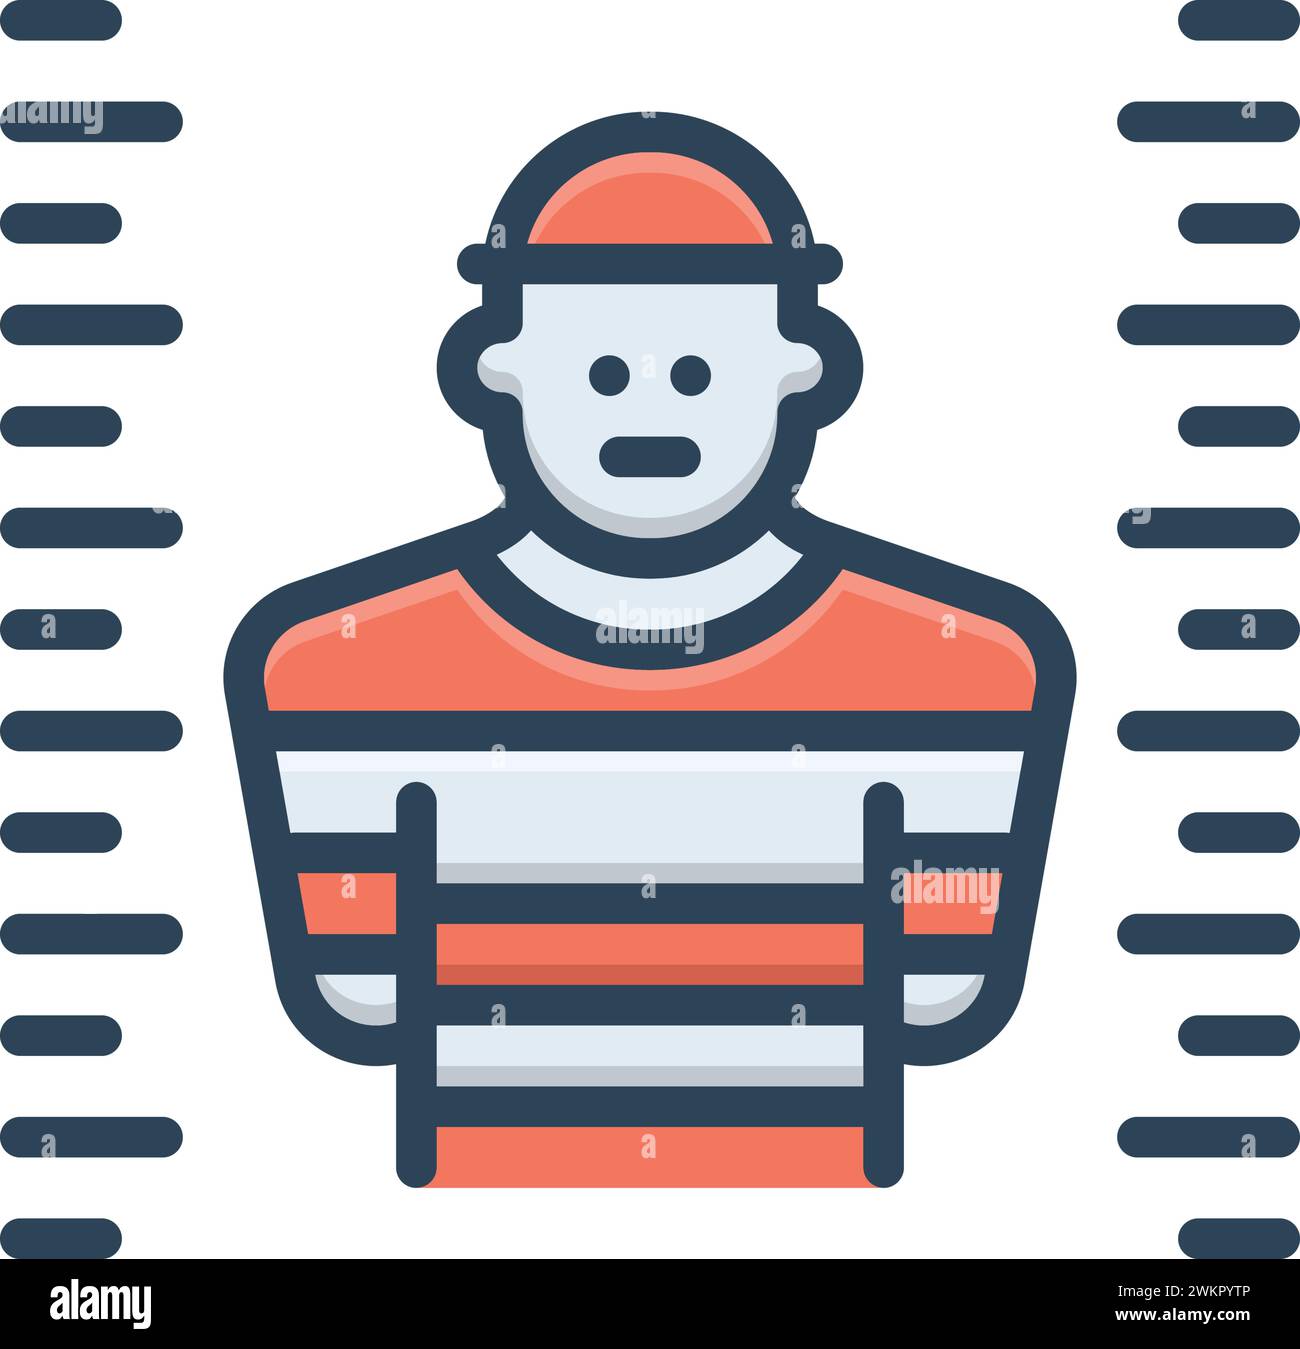 Icon for criminal,offender Stock Vector